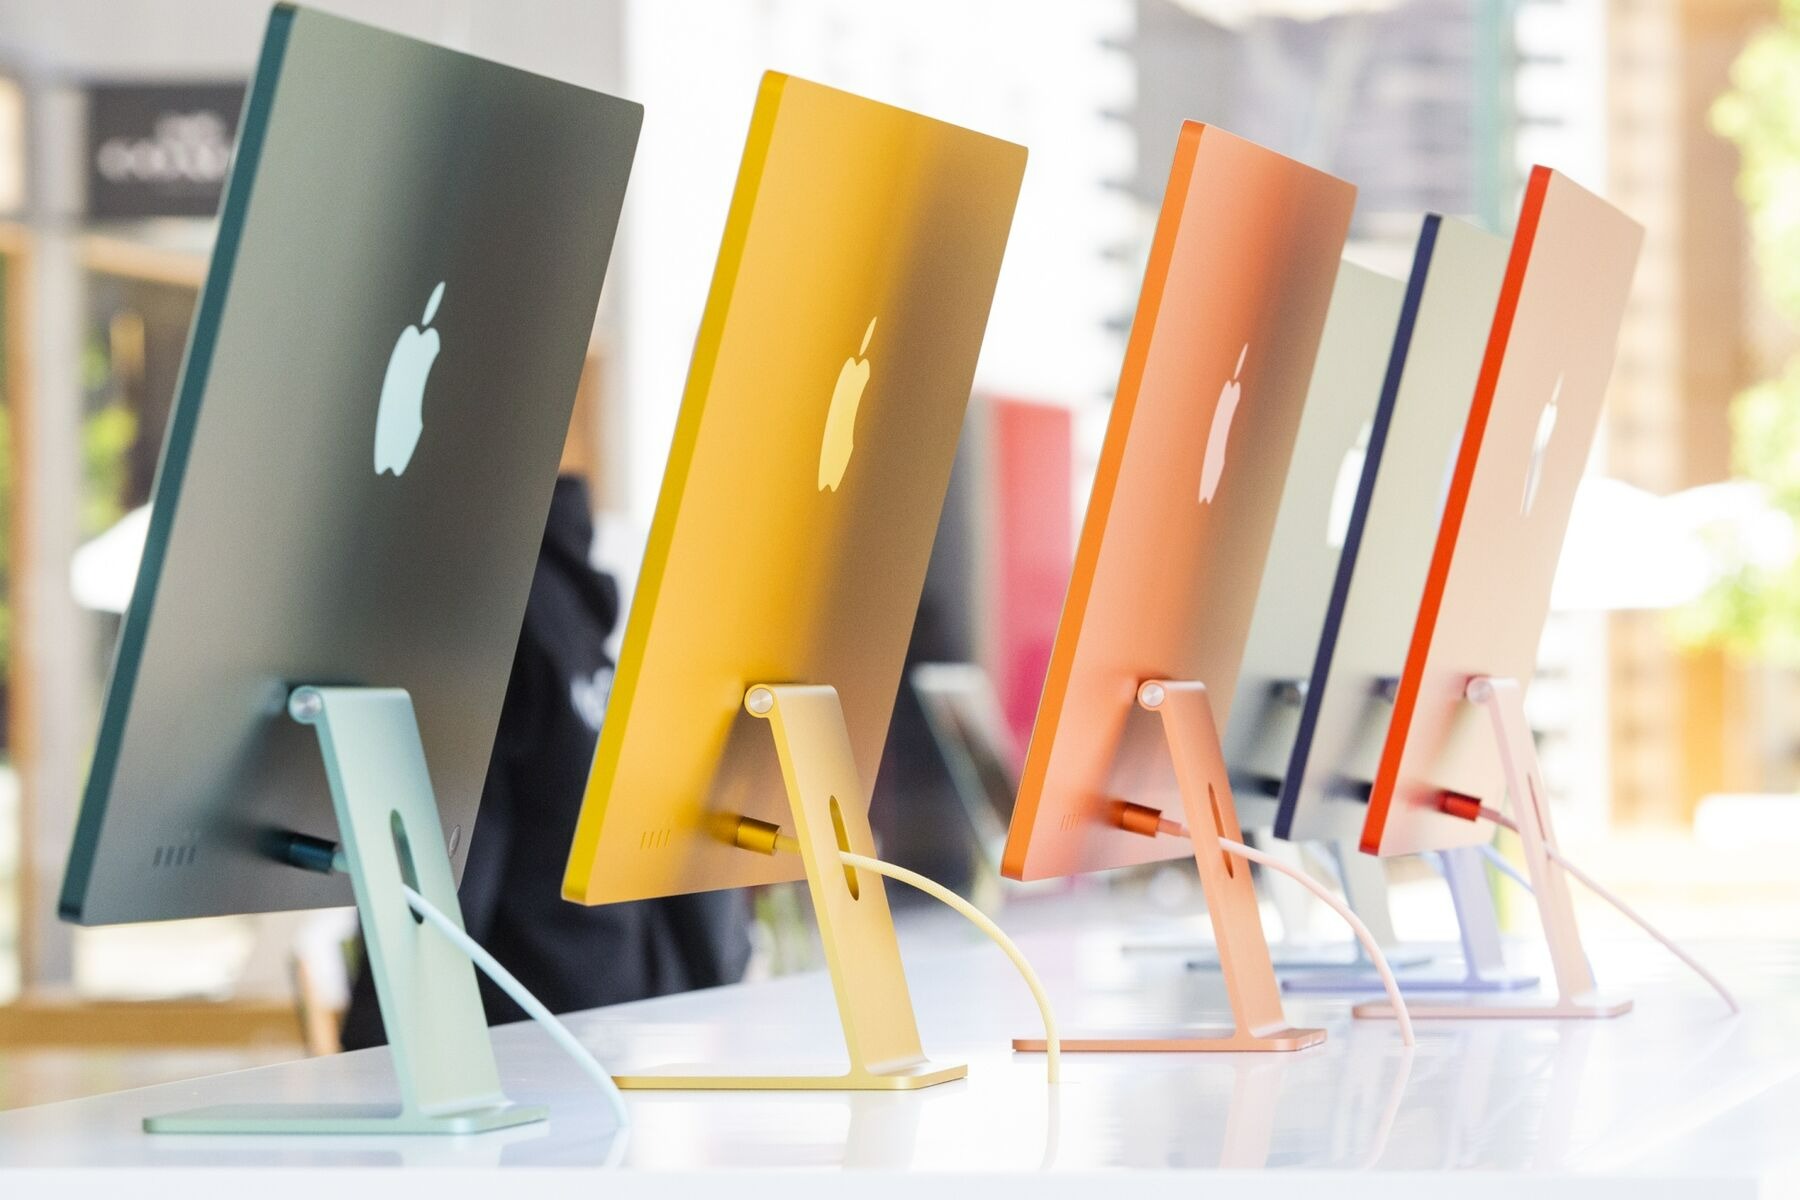 M3 iMac Buying Guide - Which One Is for You? - Mark Ellis Reviews